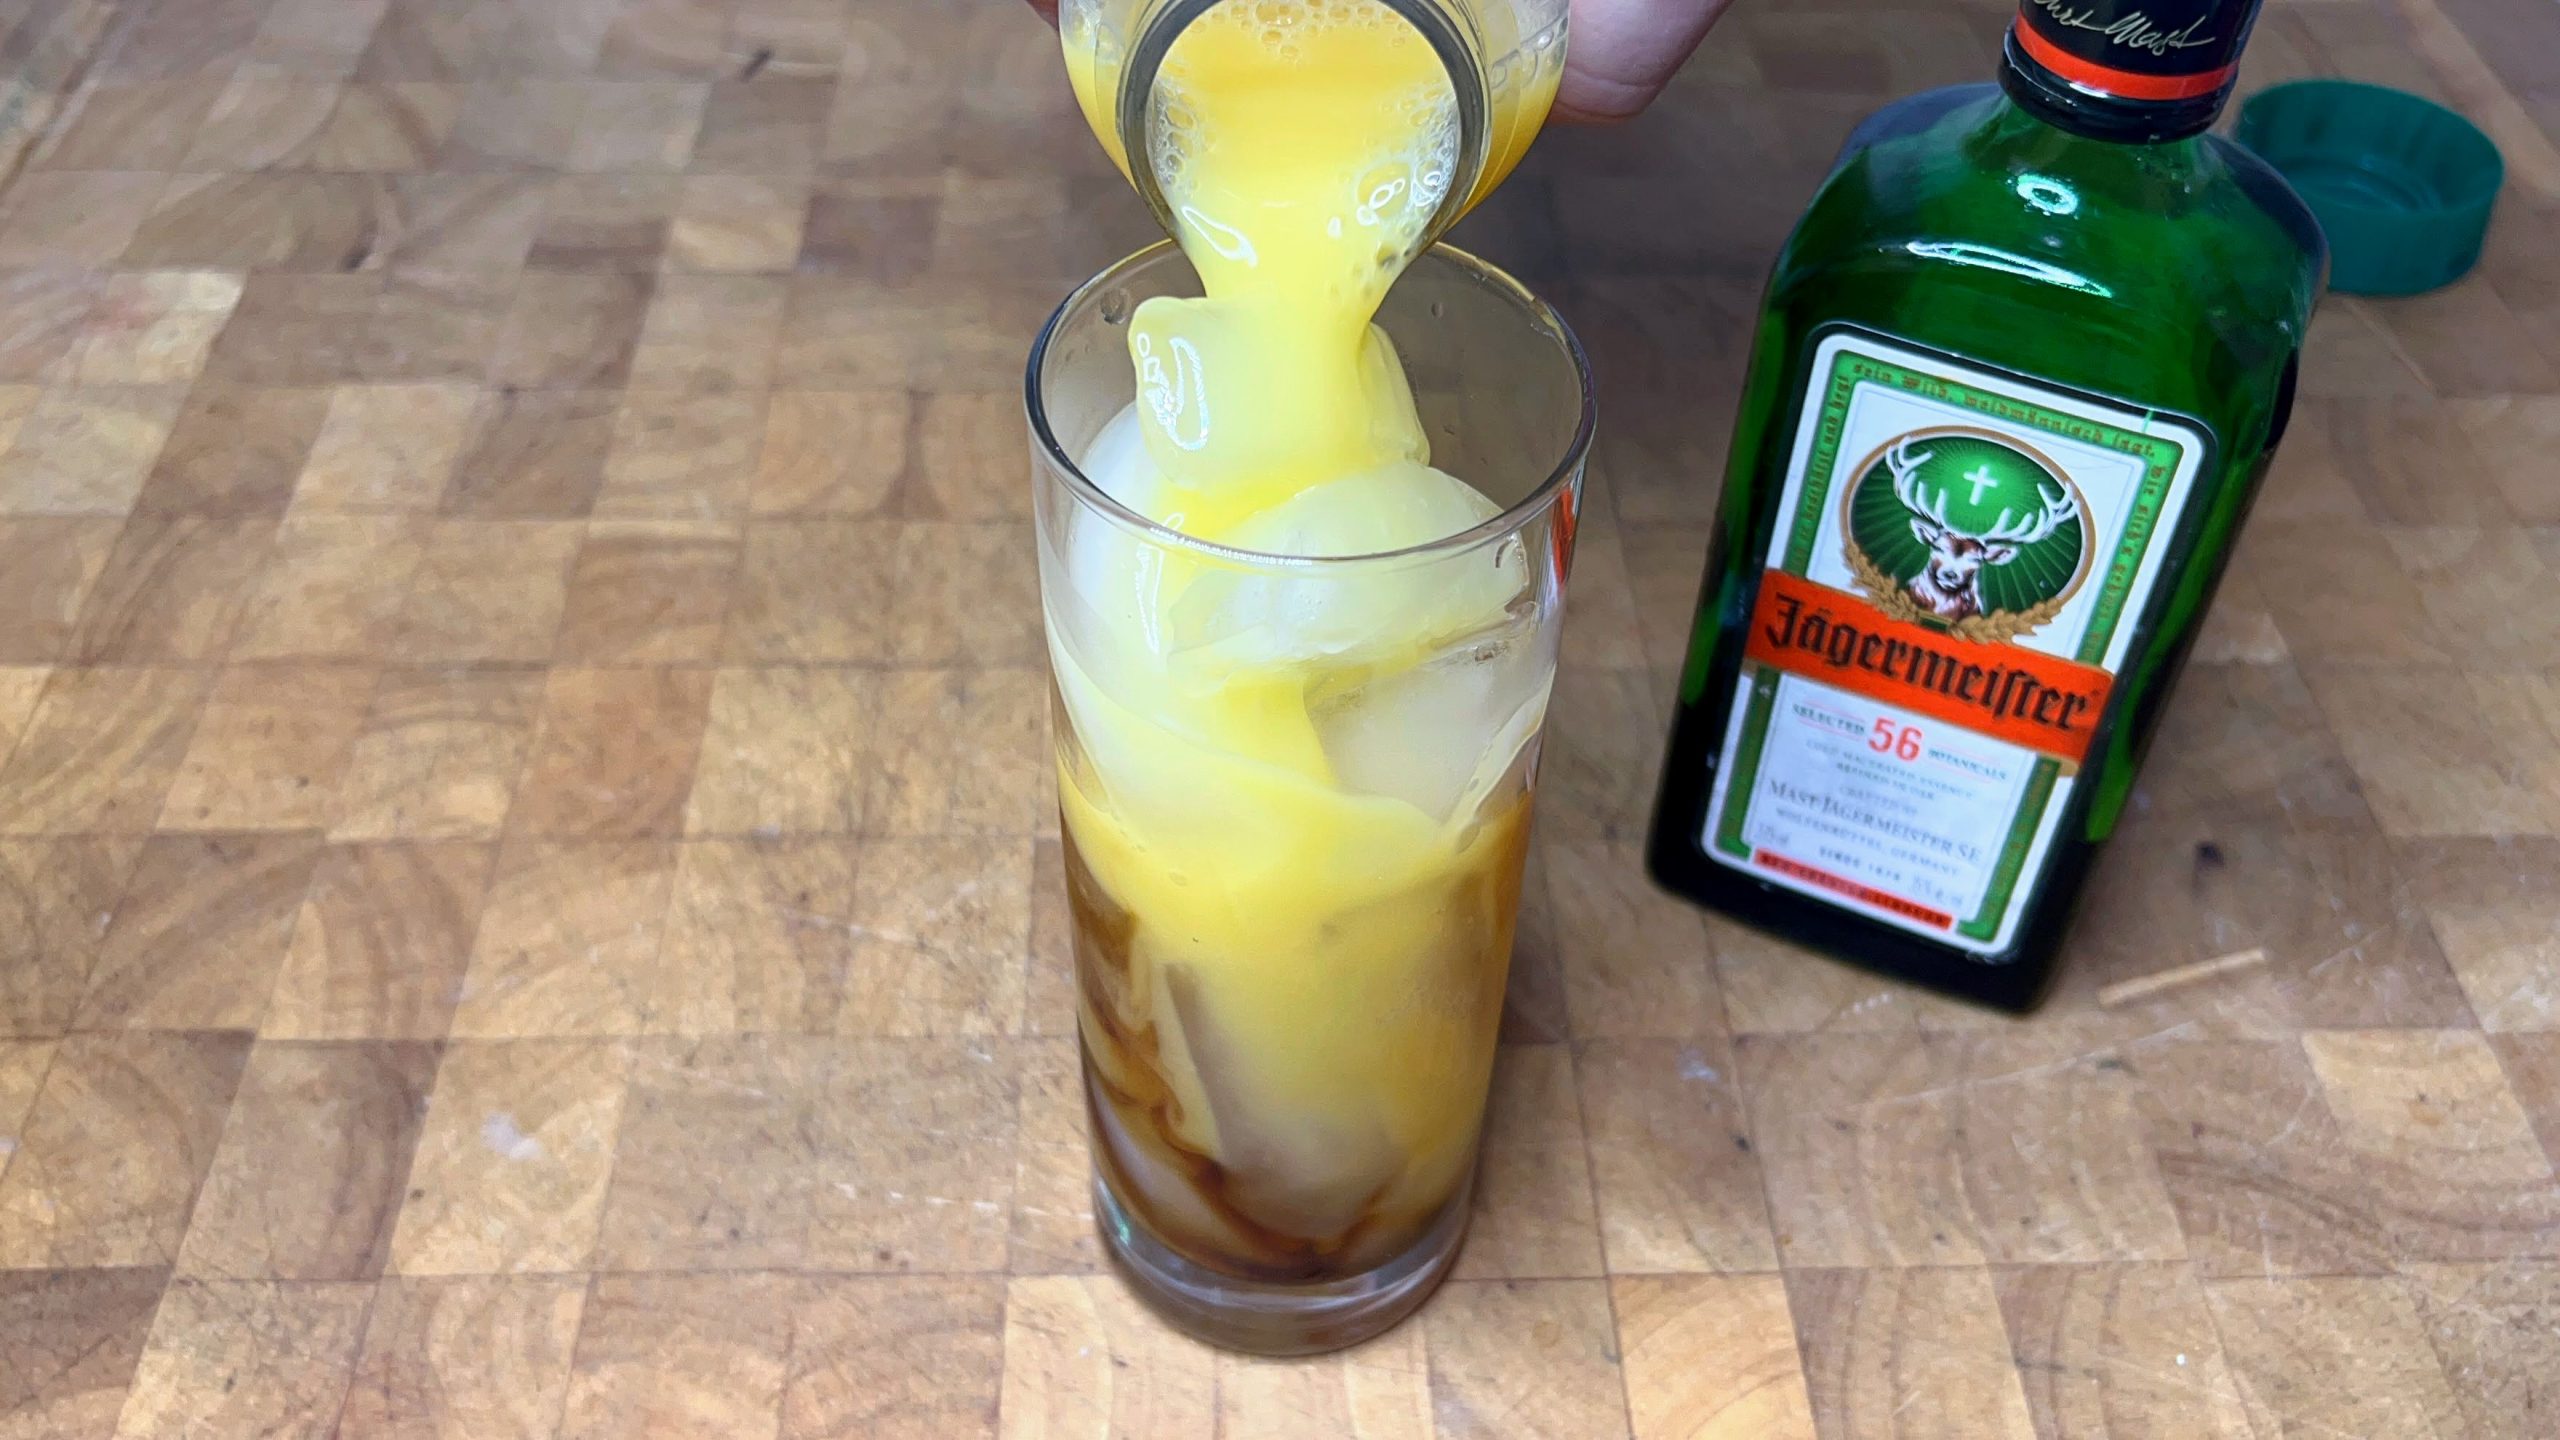 pouring orange juice into a glass with jager